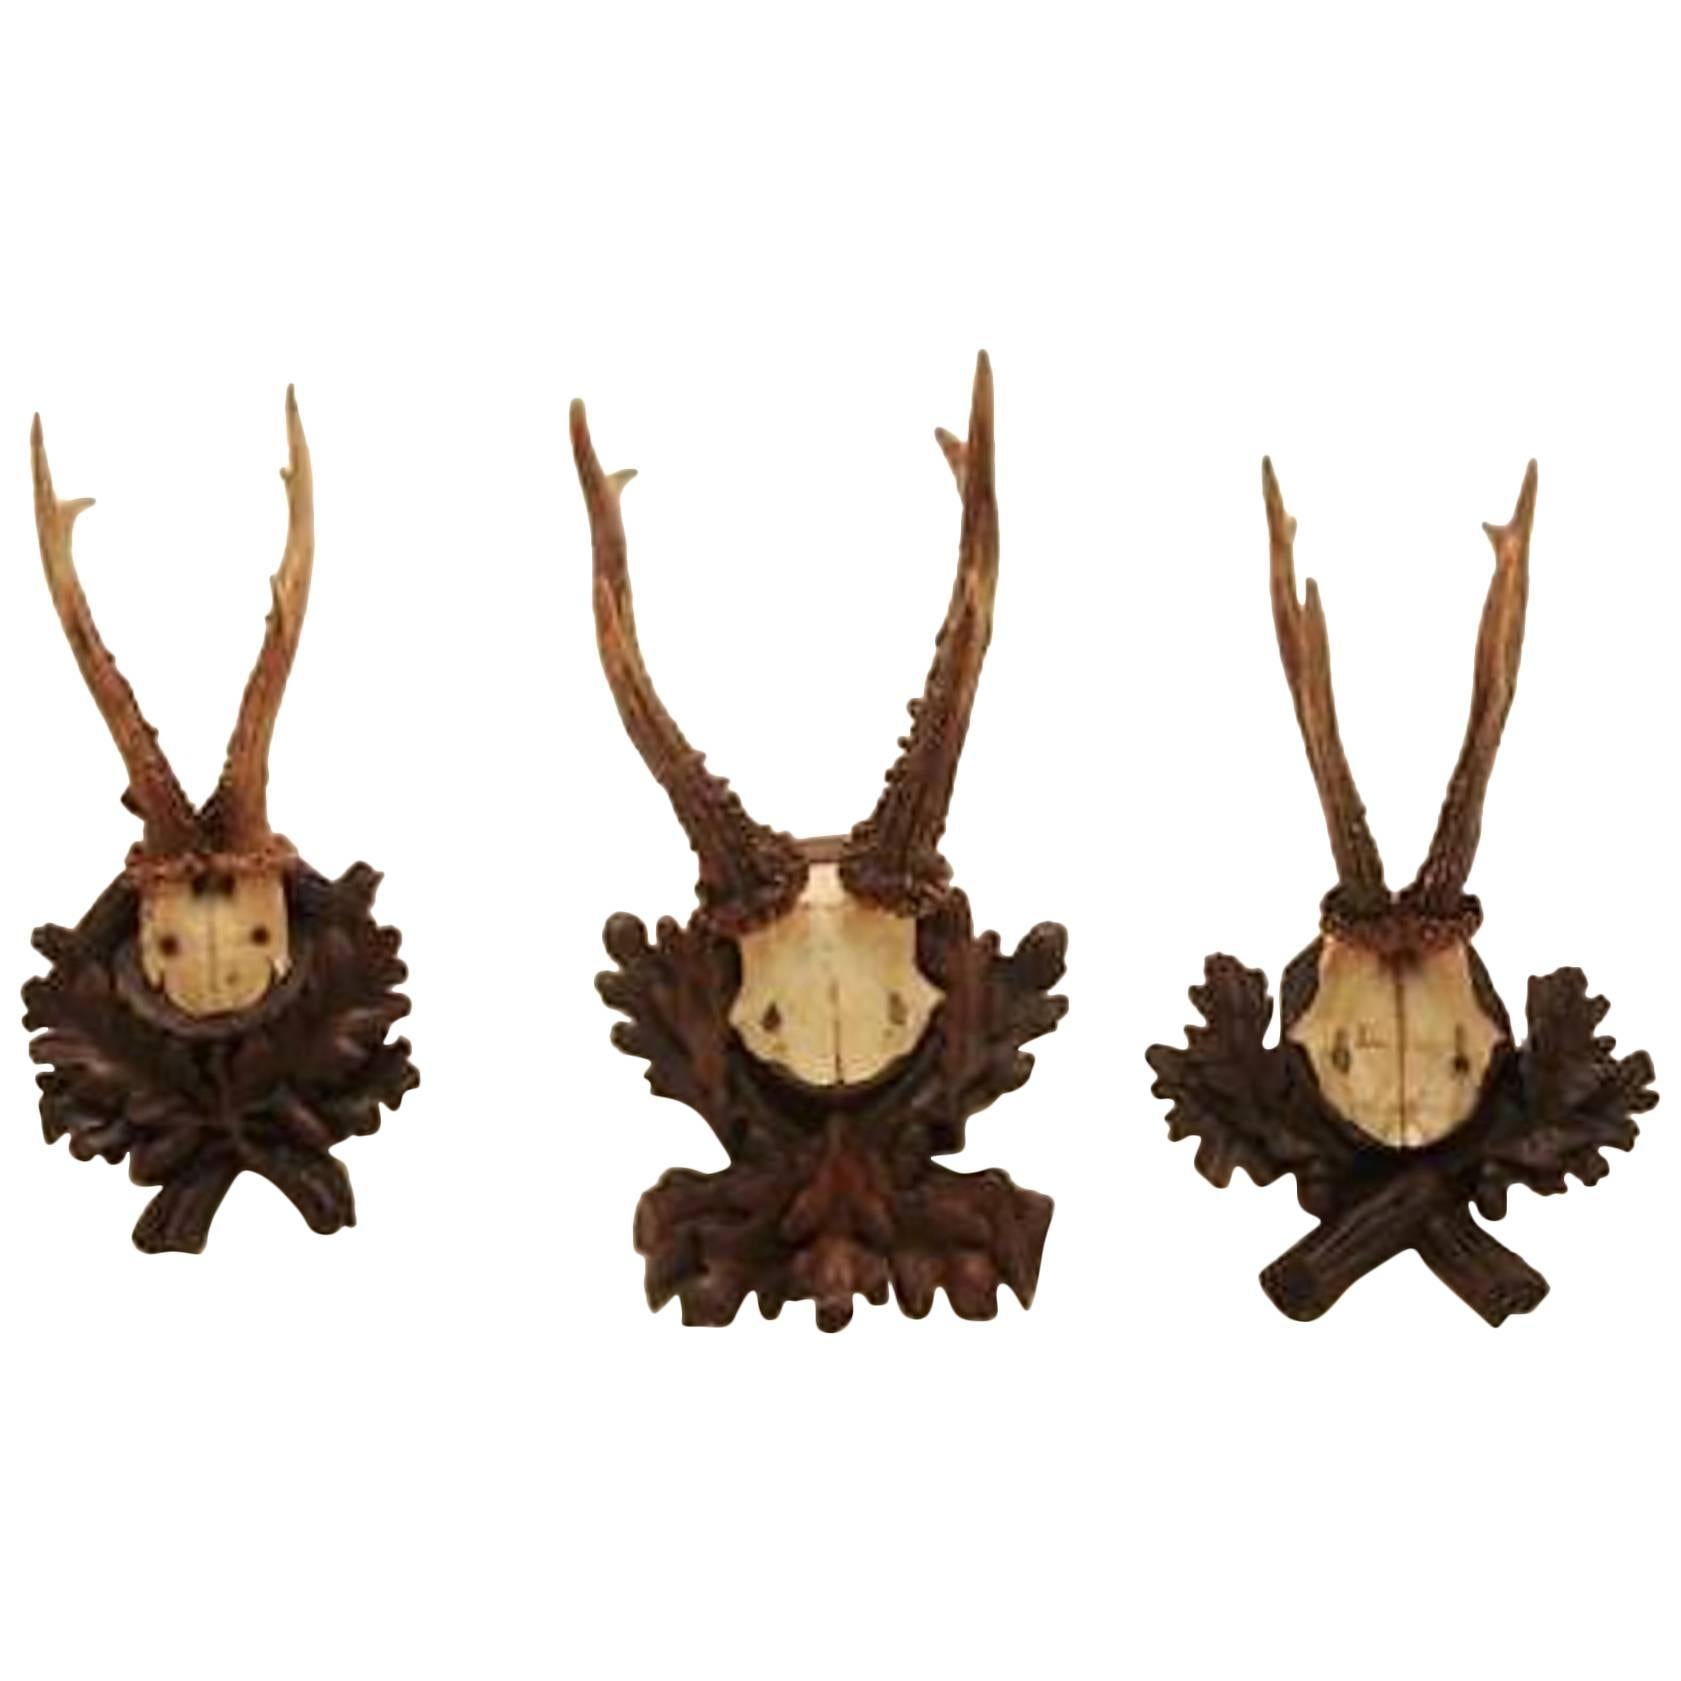 Collection of Nine Black Forest Antler Mounts on Hand-Carved Wood Plaques Priced